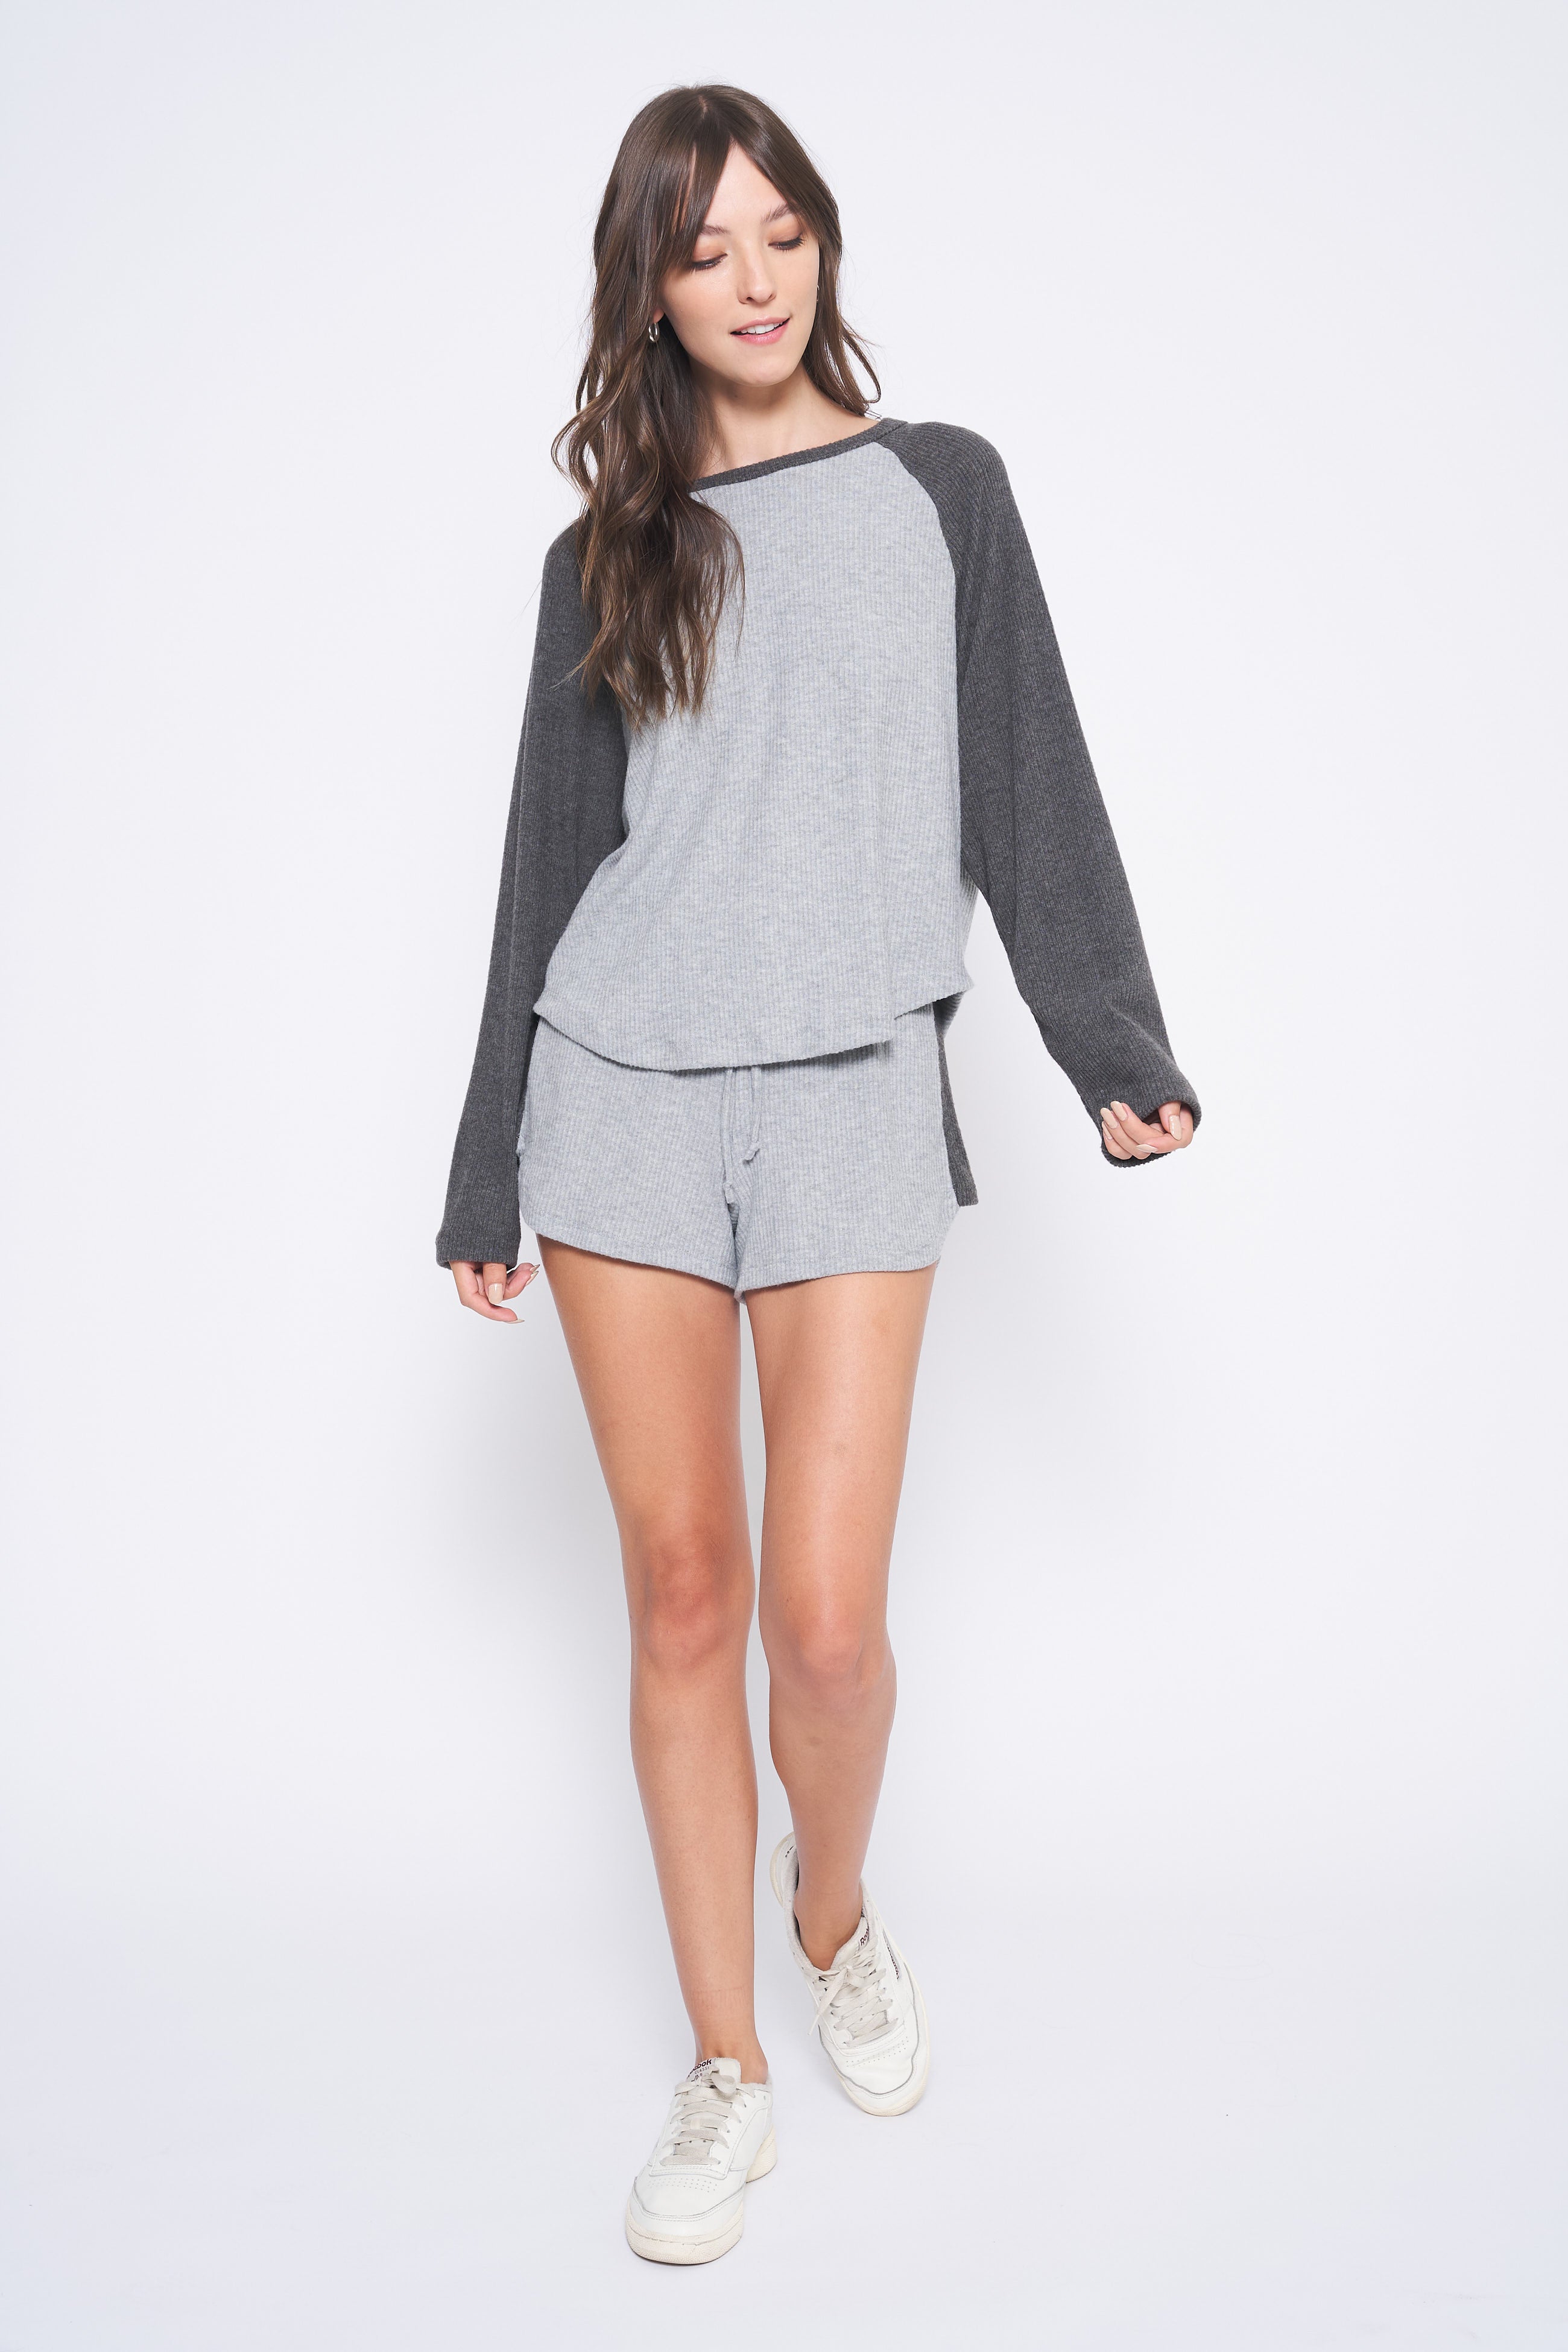 Bases Loaded Color Block Cozy Top